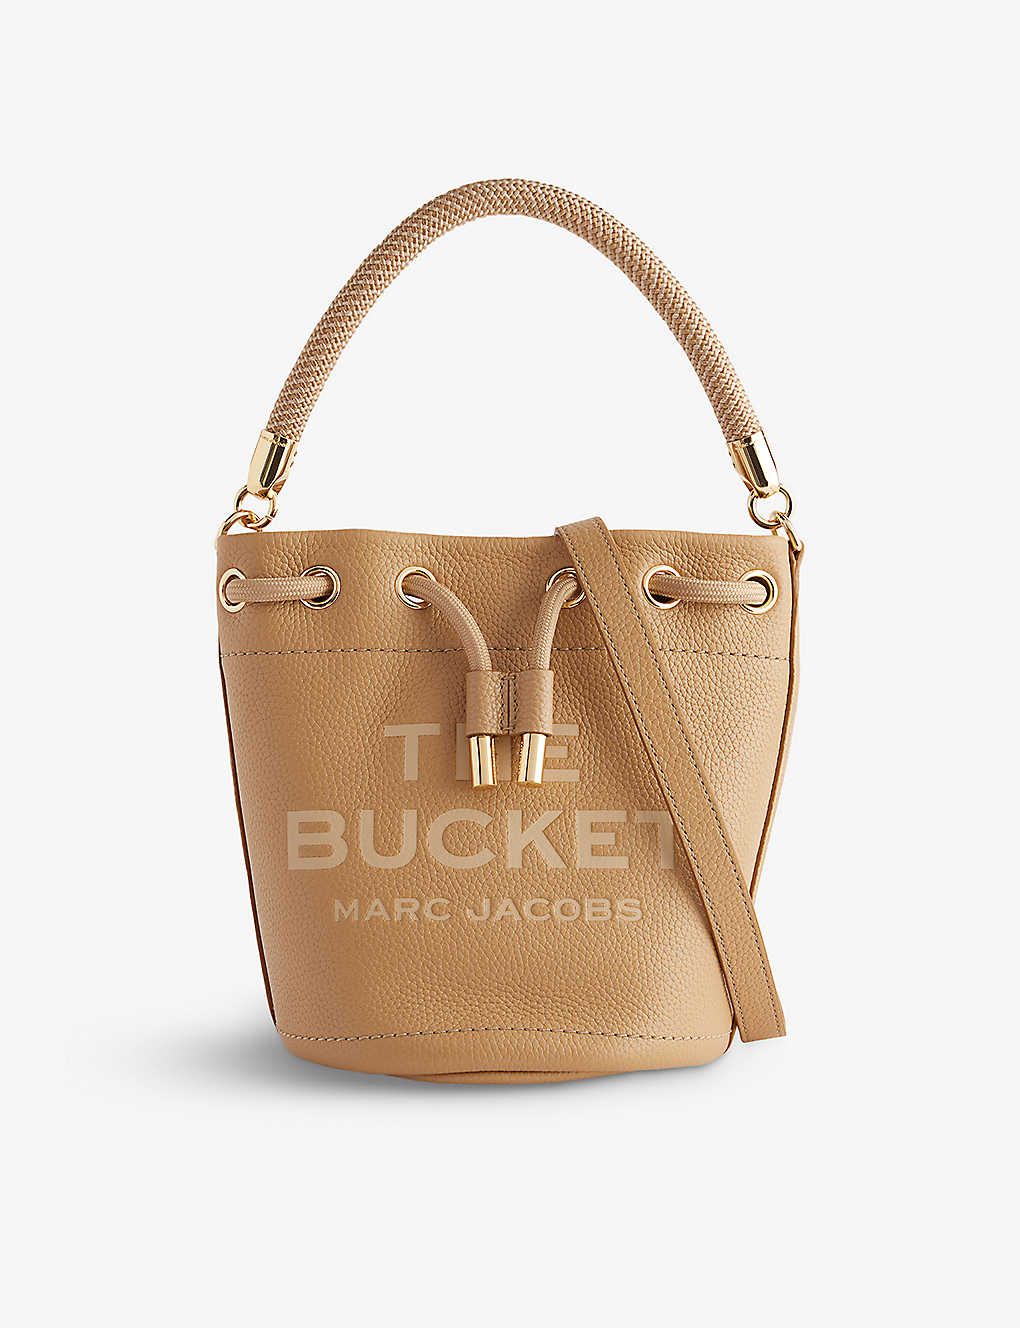 Marc Jacobs Womens Camel The Bucket Leather Bucket Bag